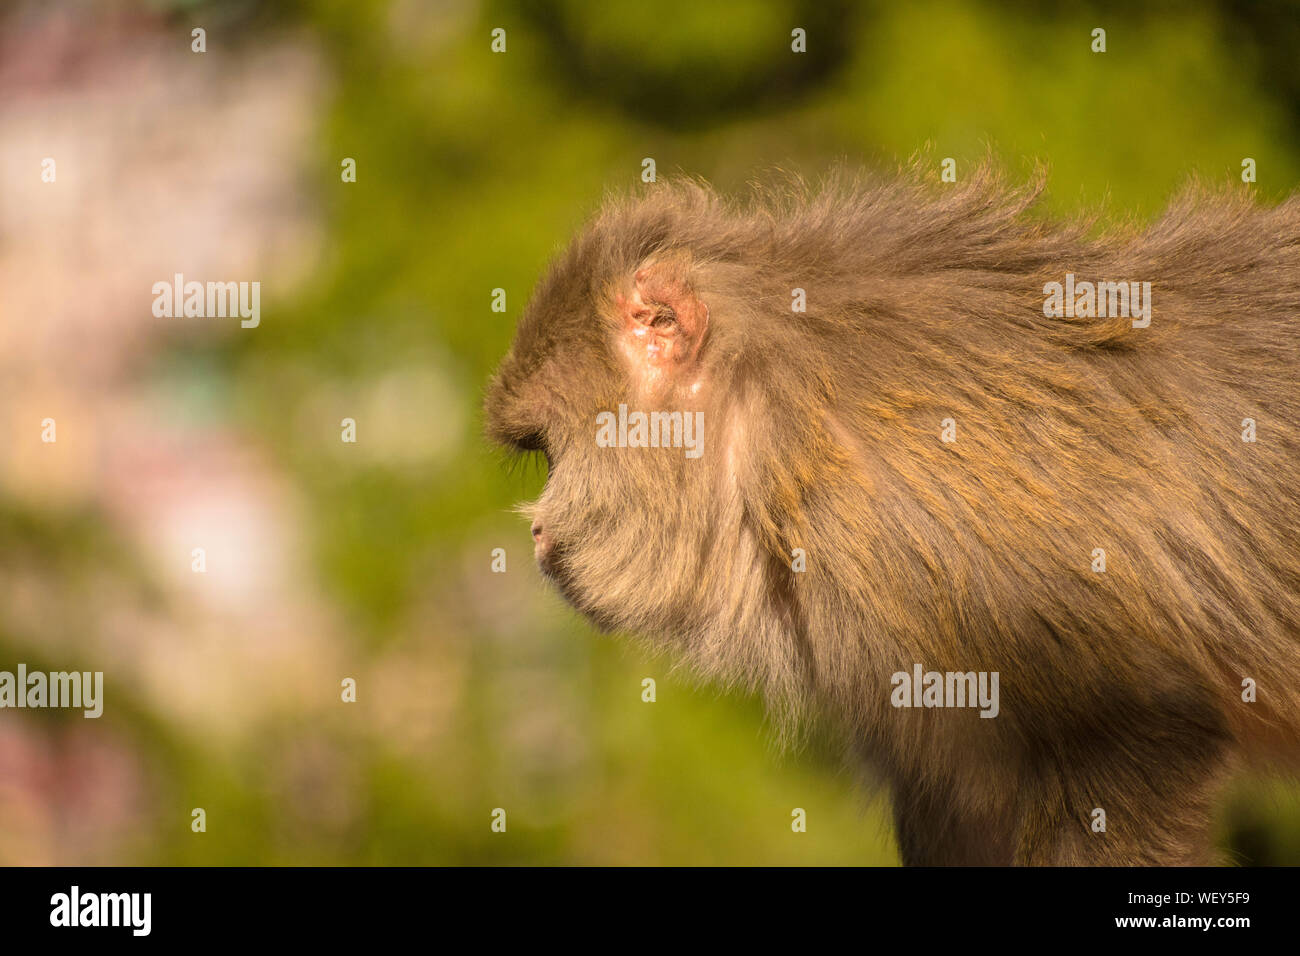 Monkey sitting on a branch of a tree or something which is its natural habitat. A natural background of thick forest is given around it. Stock Photo